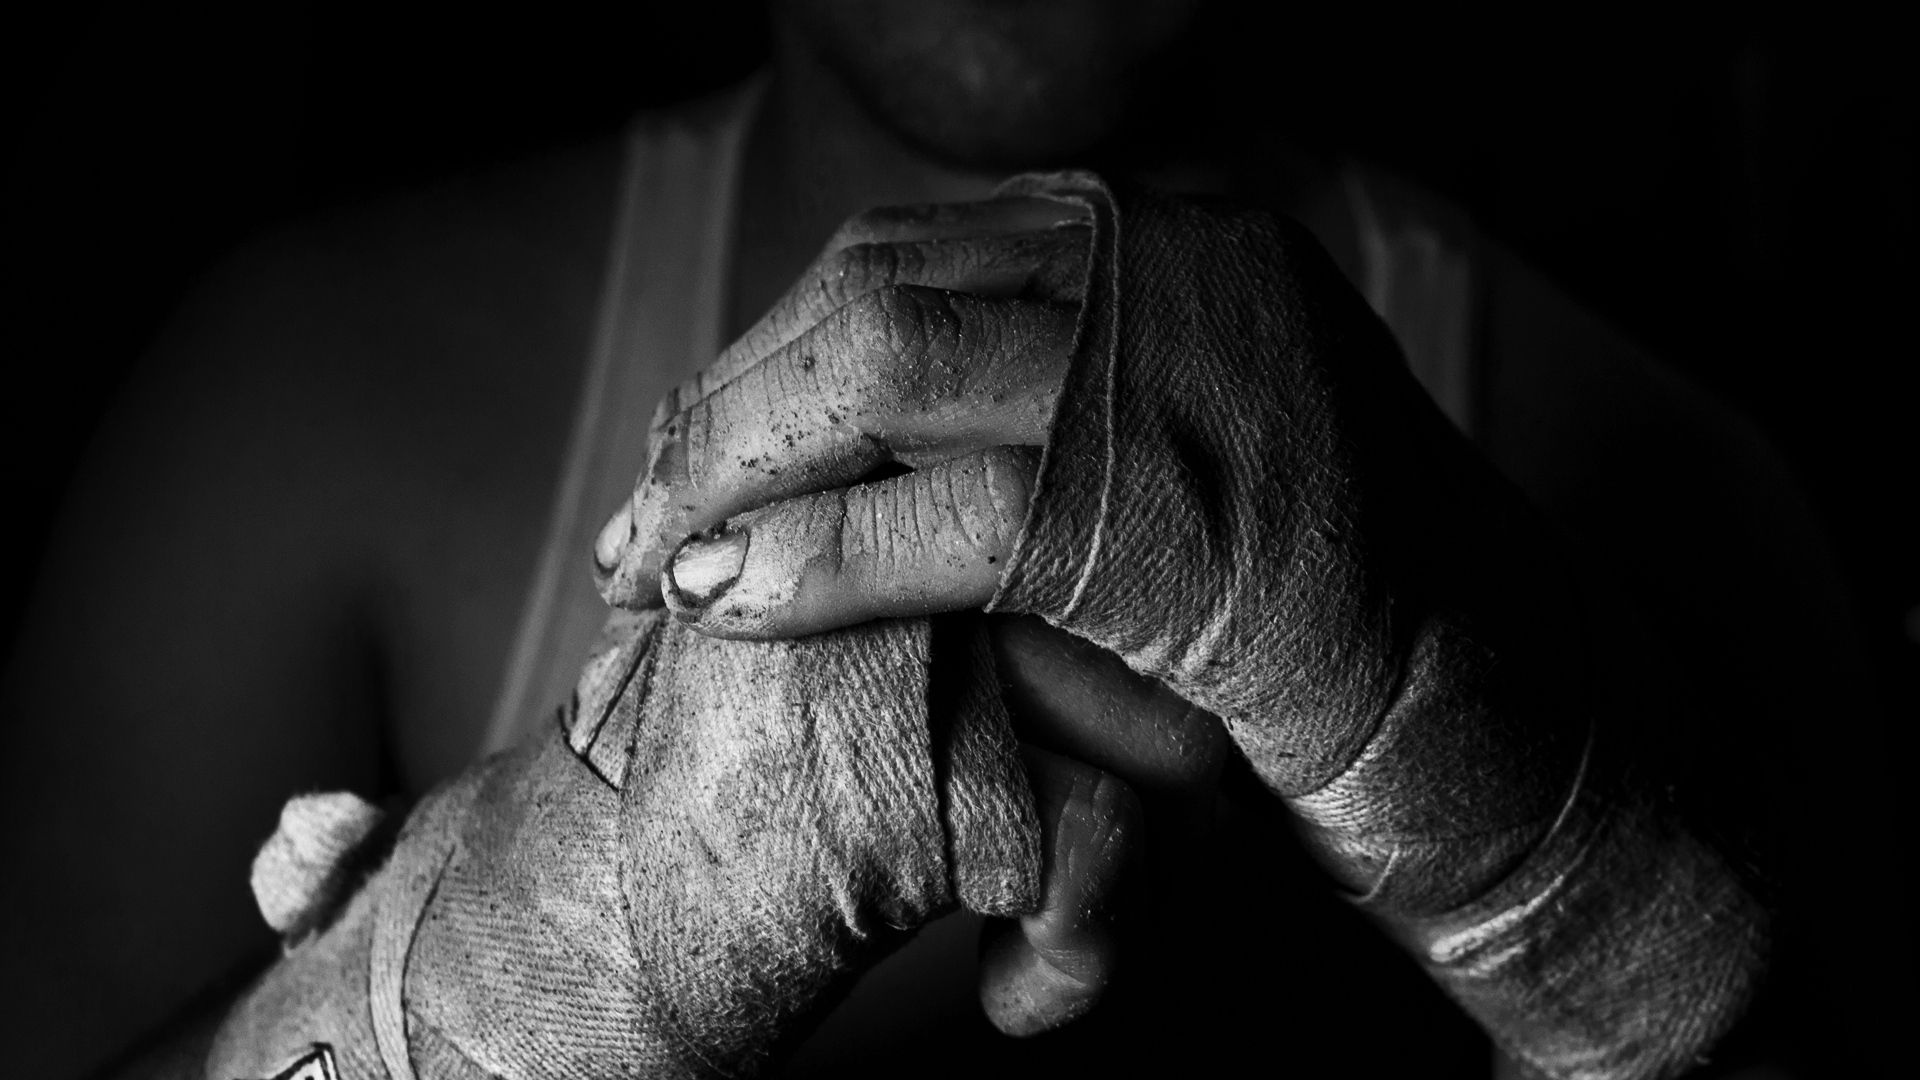 Wallpaper Full HD sports, hands, bw, chb, fighter, bandages